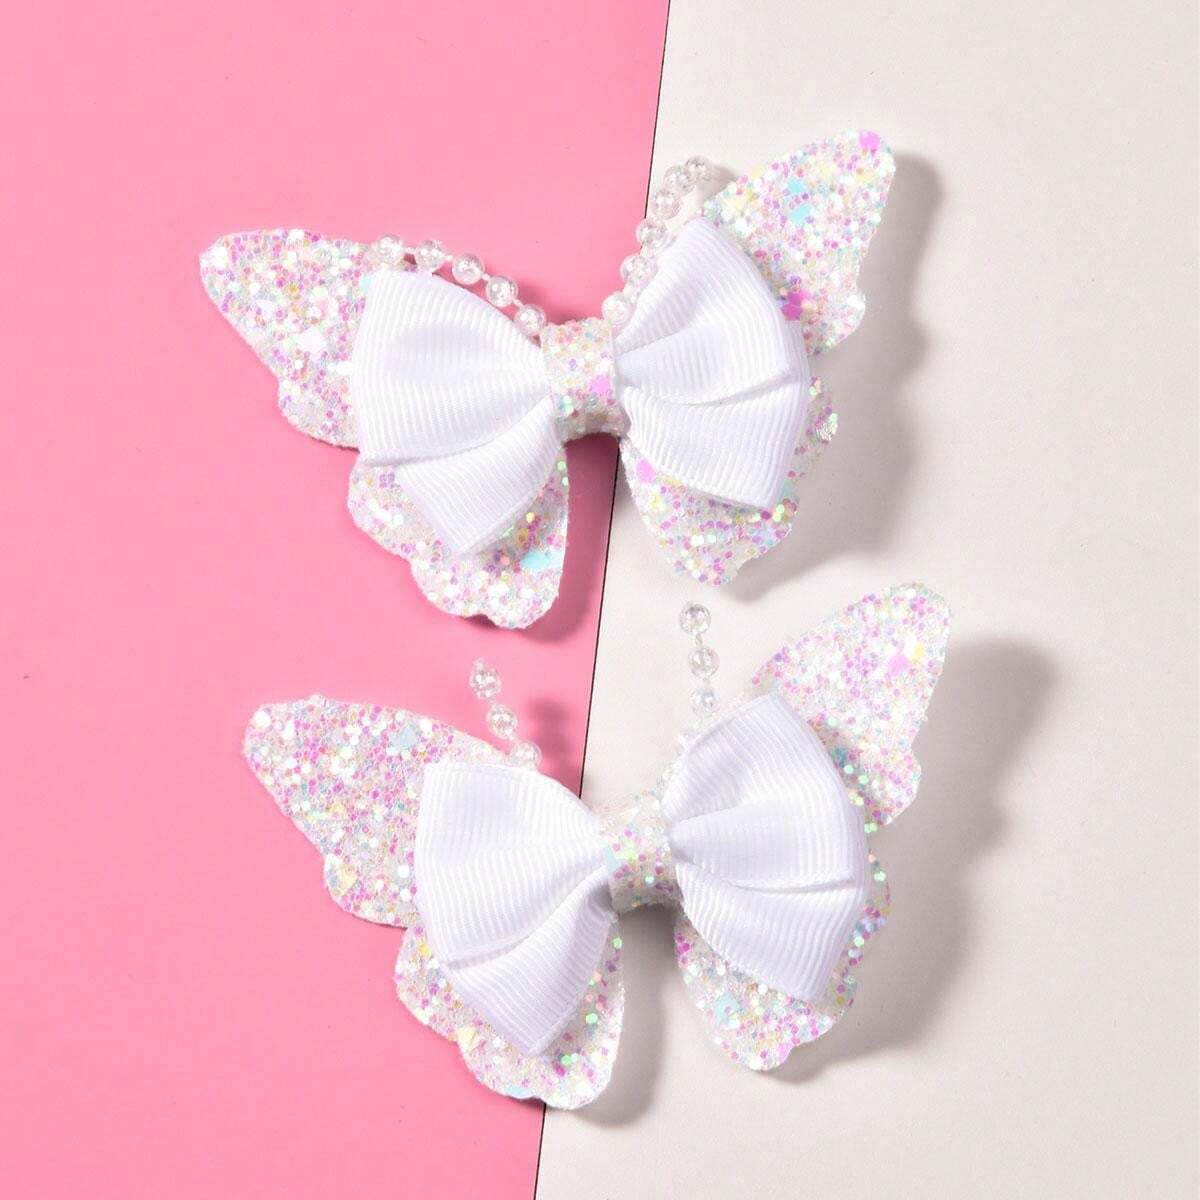 2pcs/set Kids' Onion-shaped Pearl & Butterfly Hair Claw, Fashionable & Cute Hair Accessory For Daily Wear